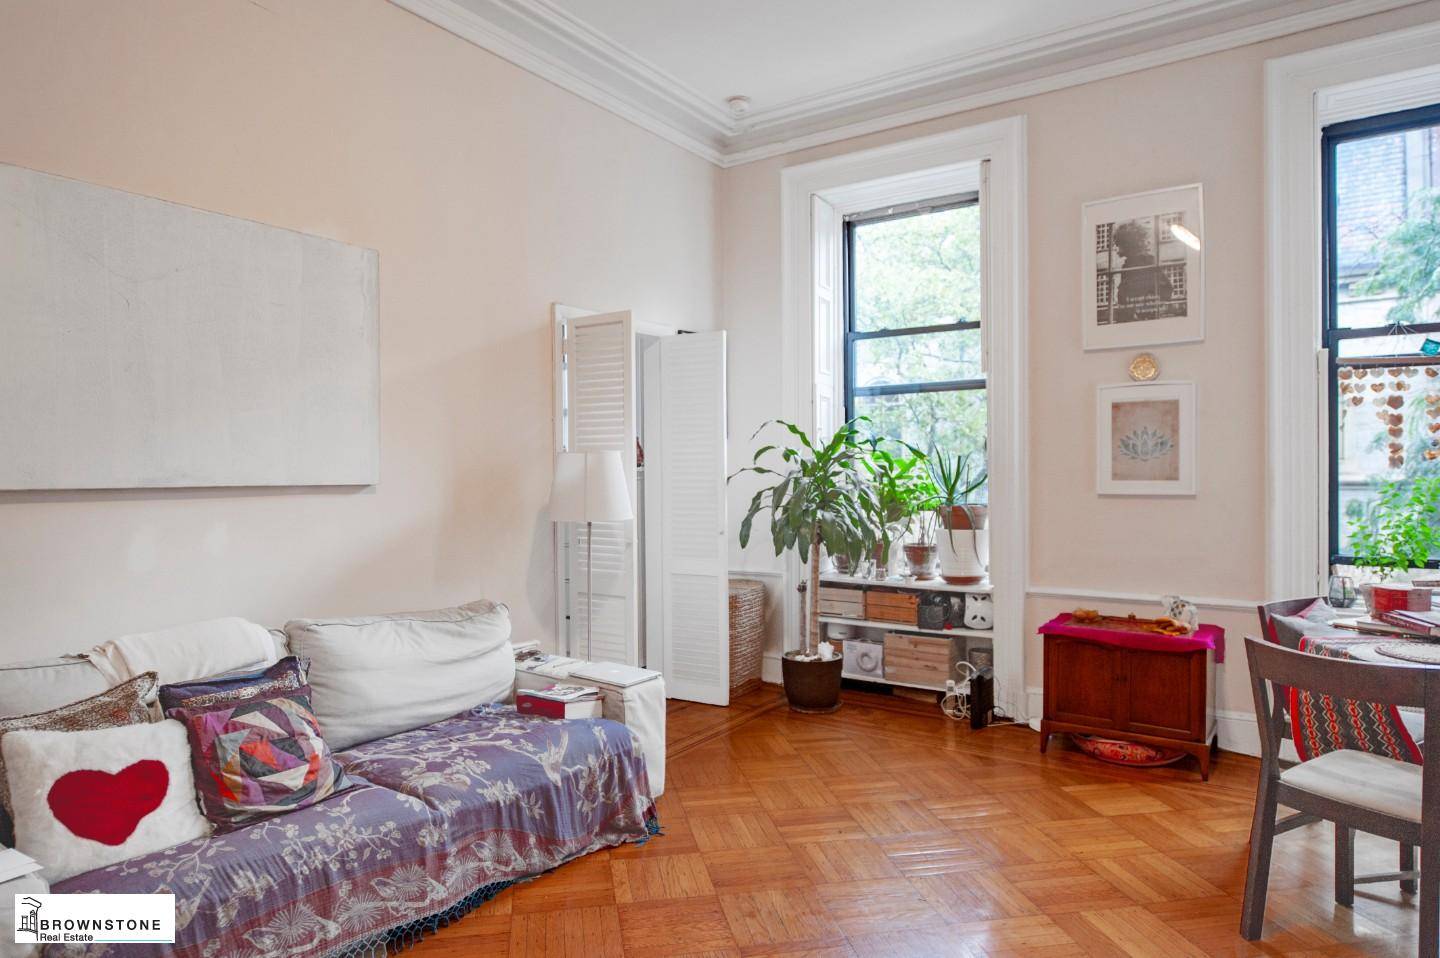 This sweet one bedroom apartment in beautiful Brooklyn Heights offers a large living room, open kitchen, and full bath.